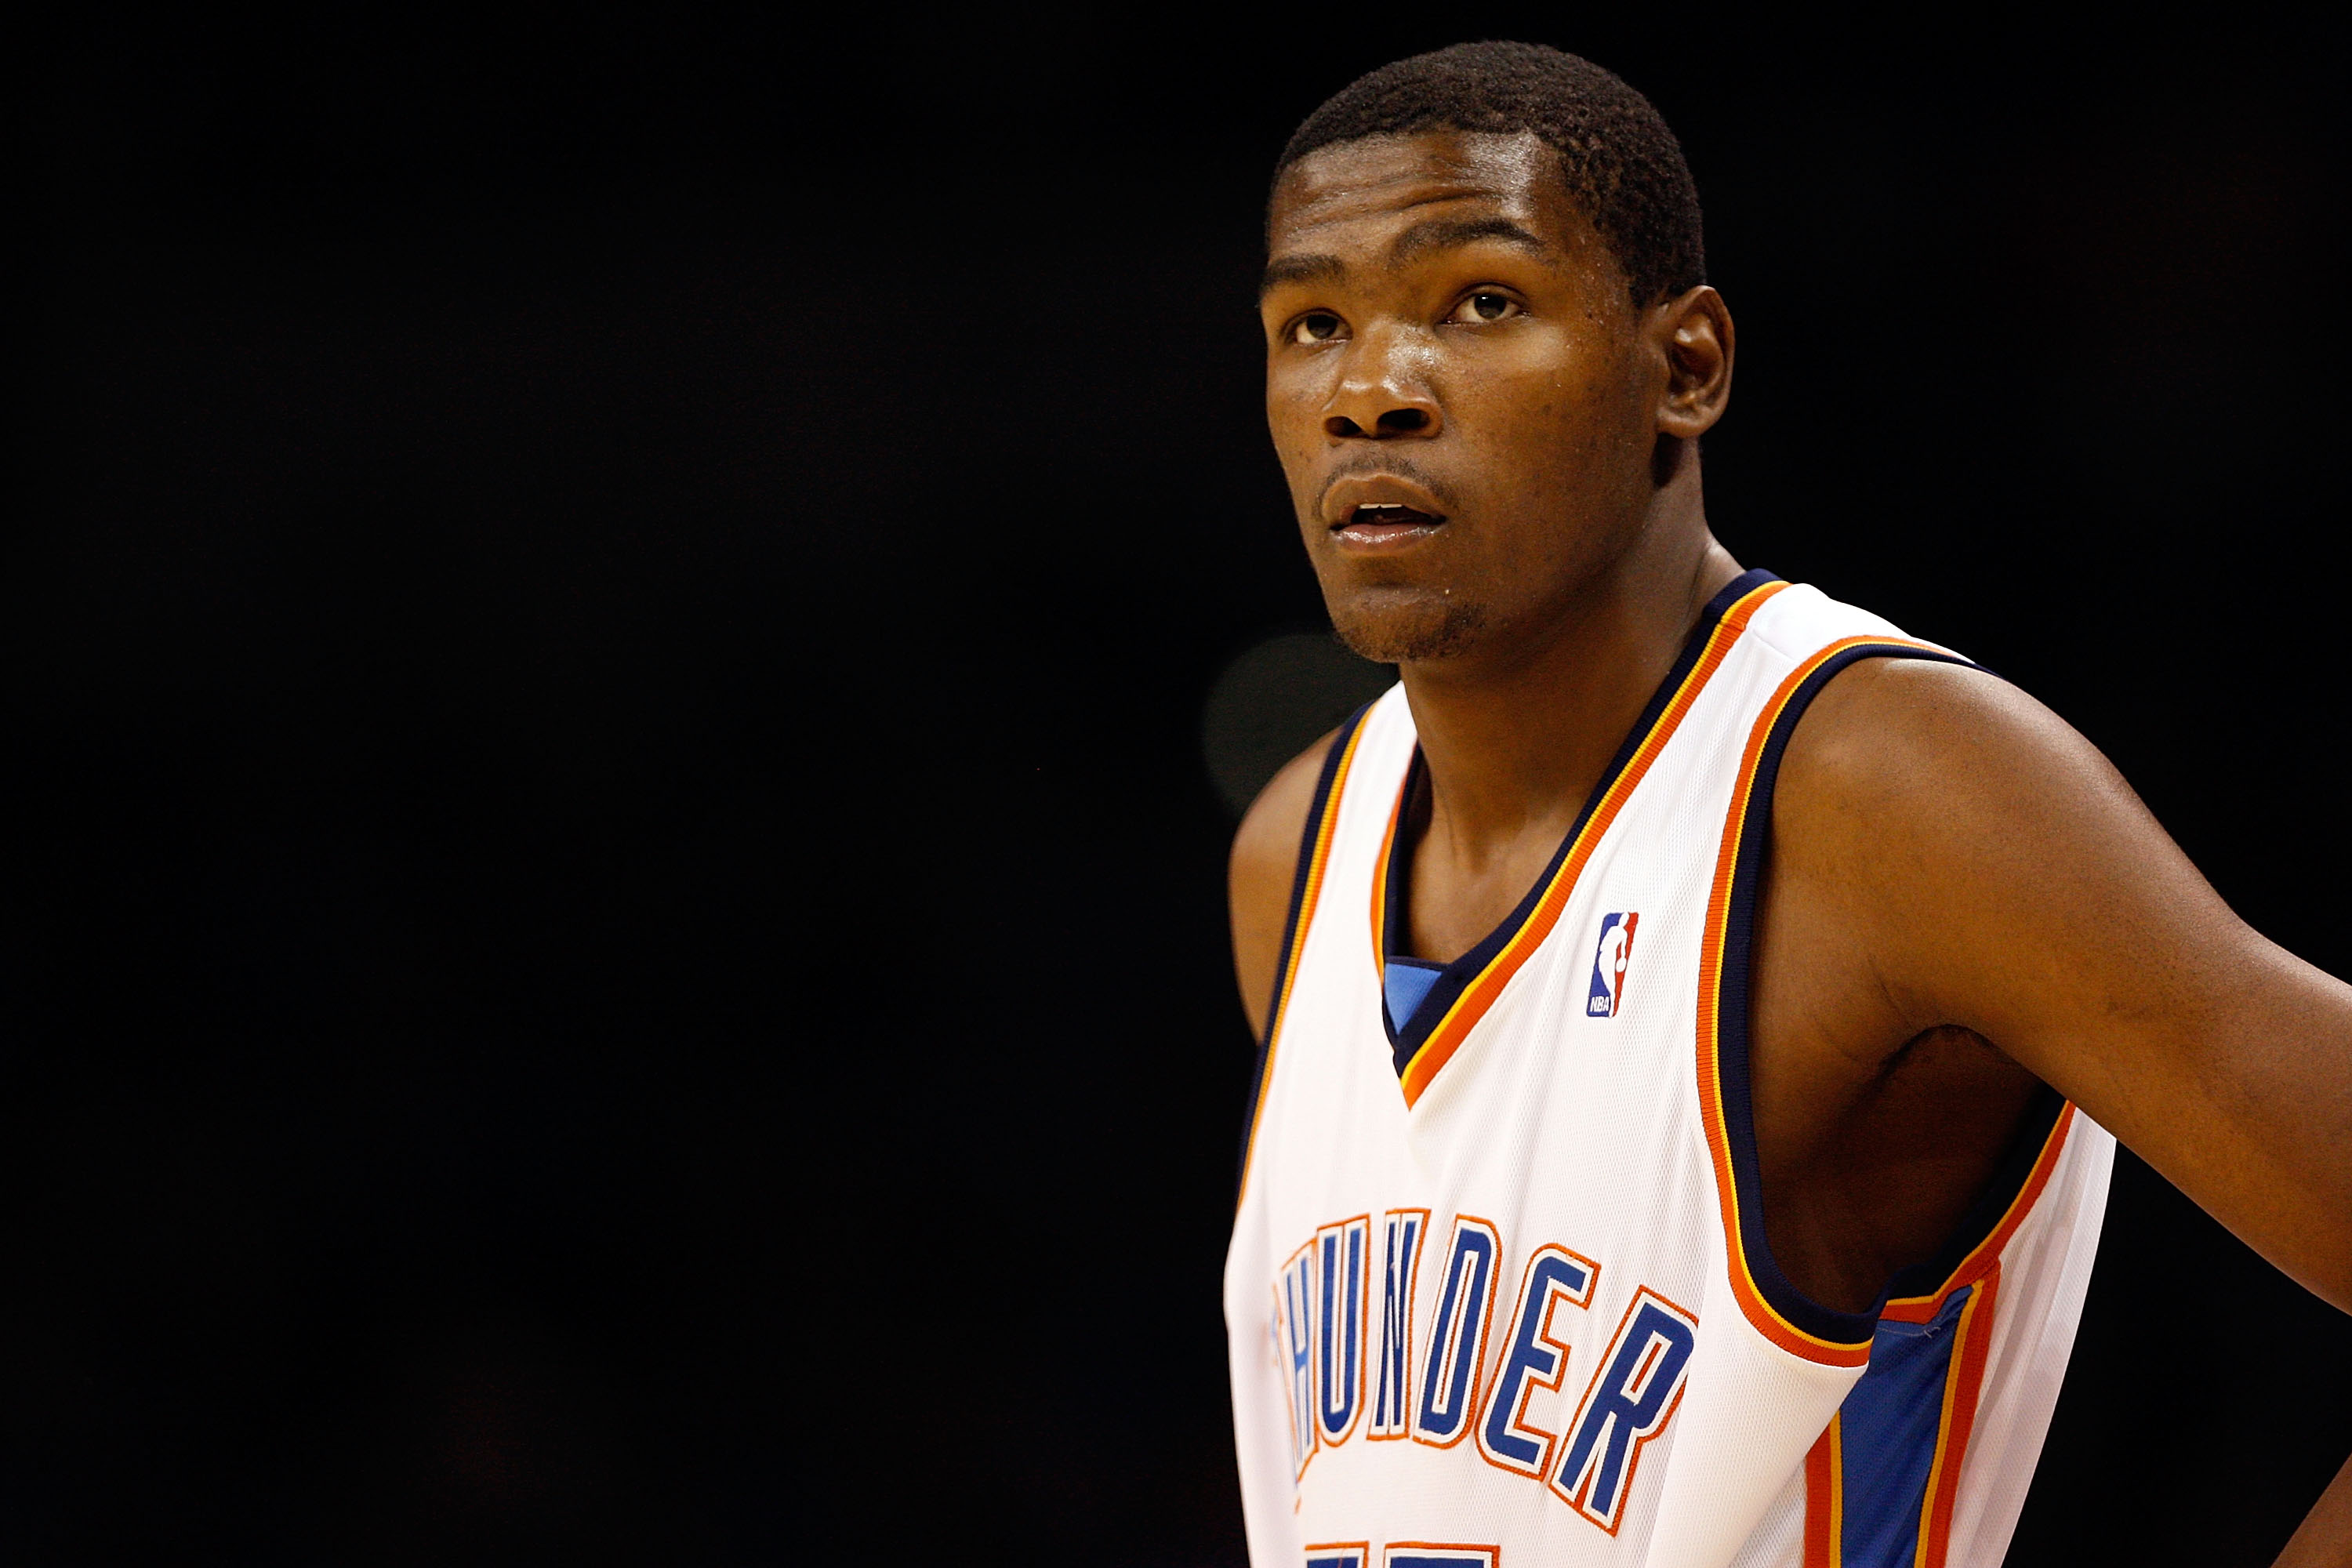 Kevin Durant could soon join an exclusive list of shooters